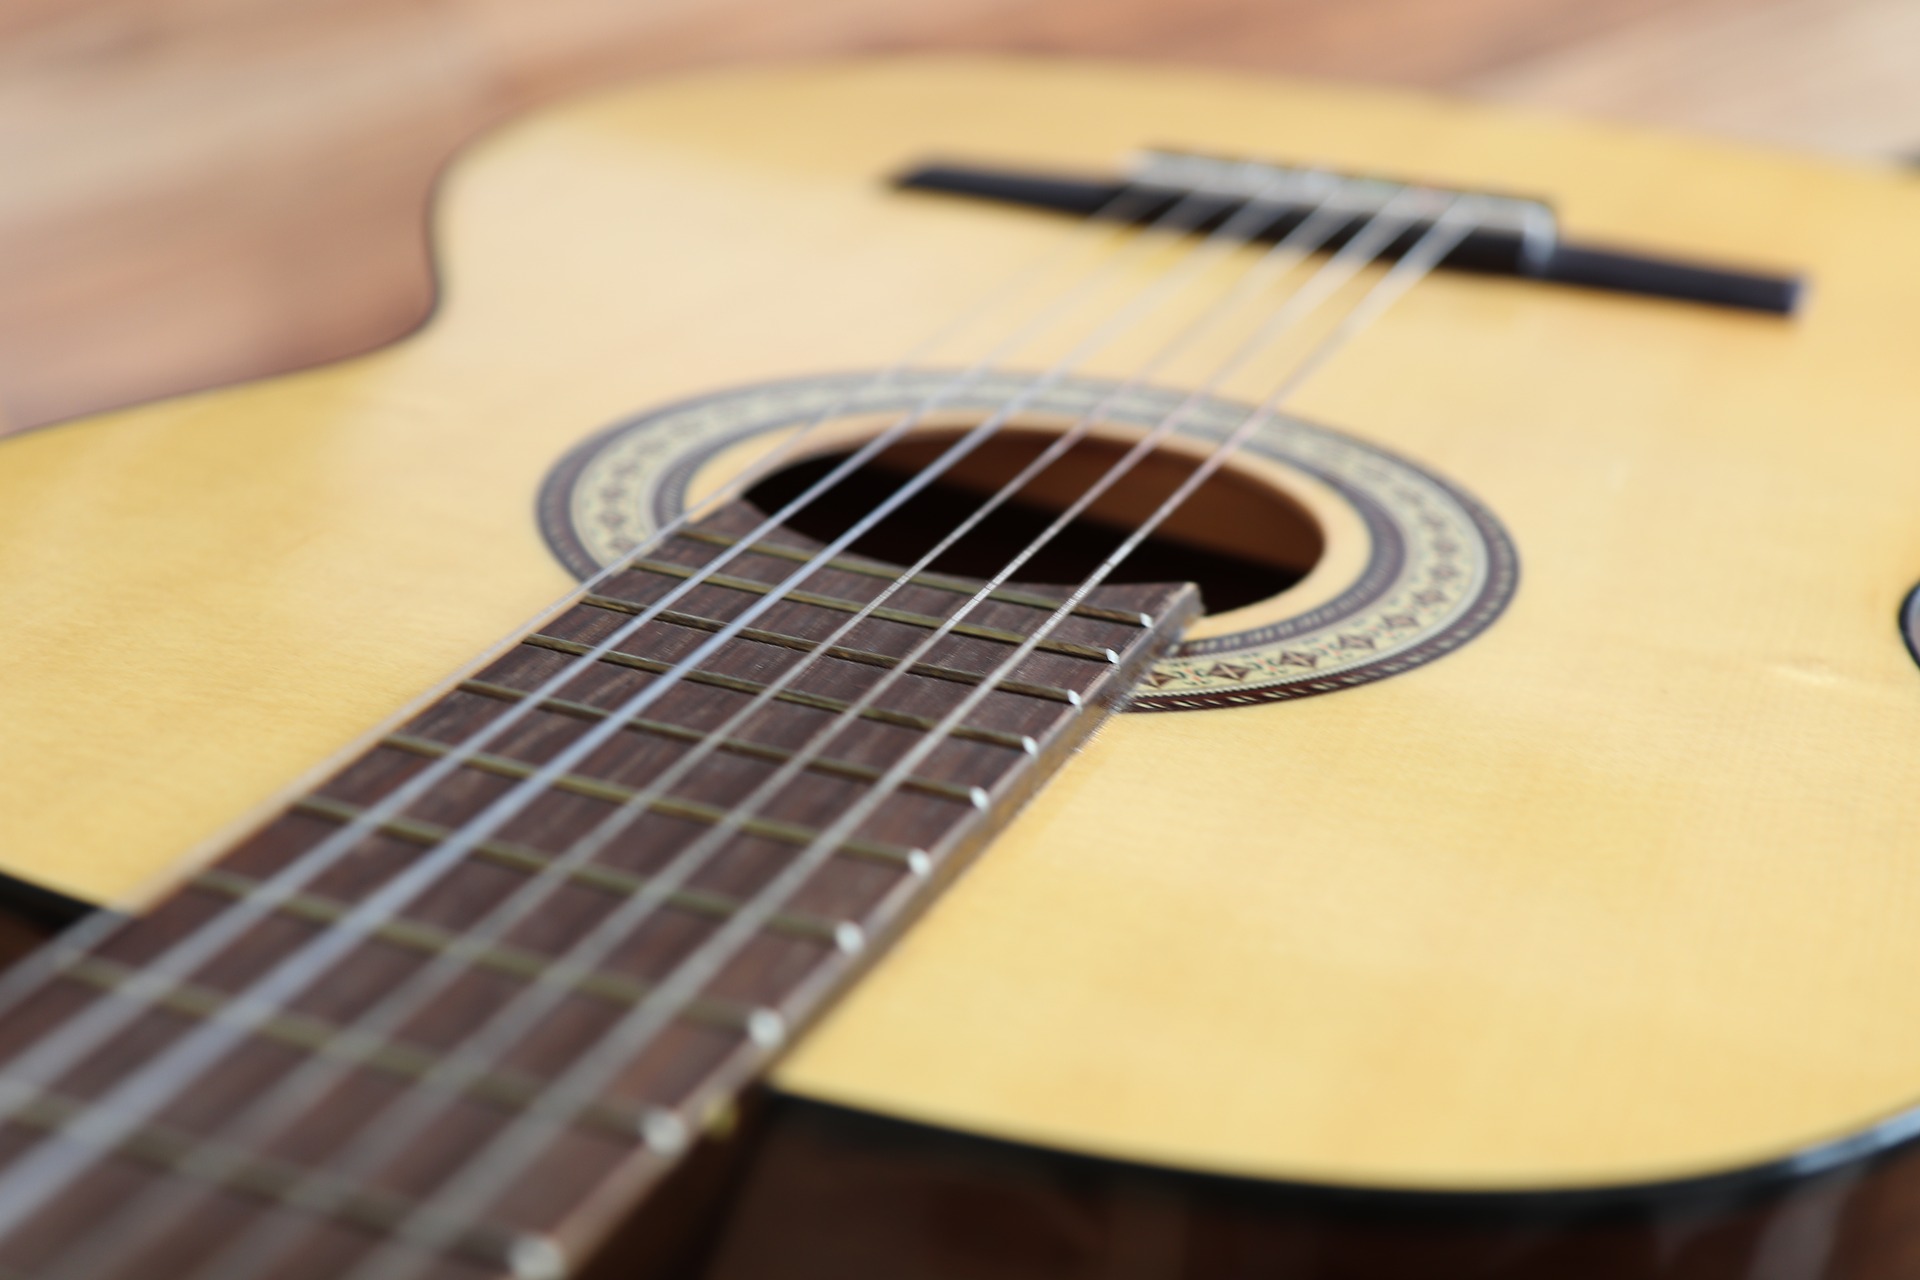 You are currently viewing Top 10 Classical Guitars for Beginners and Pros in 2022